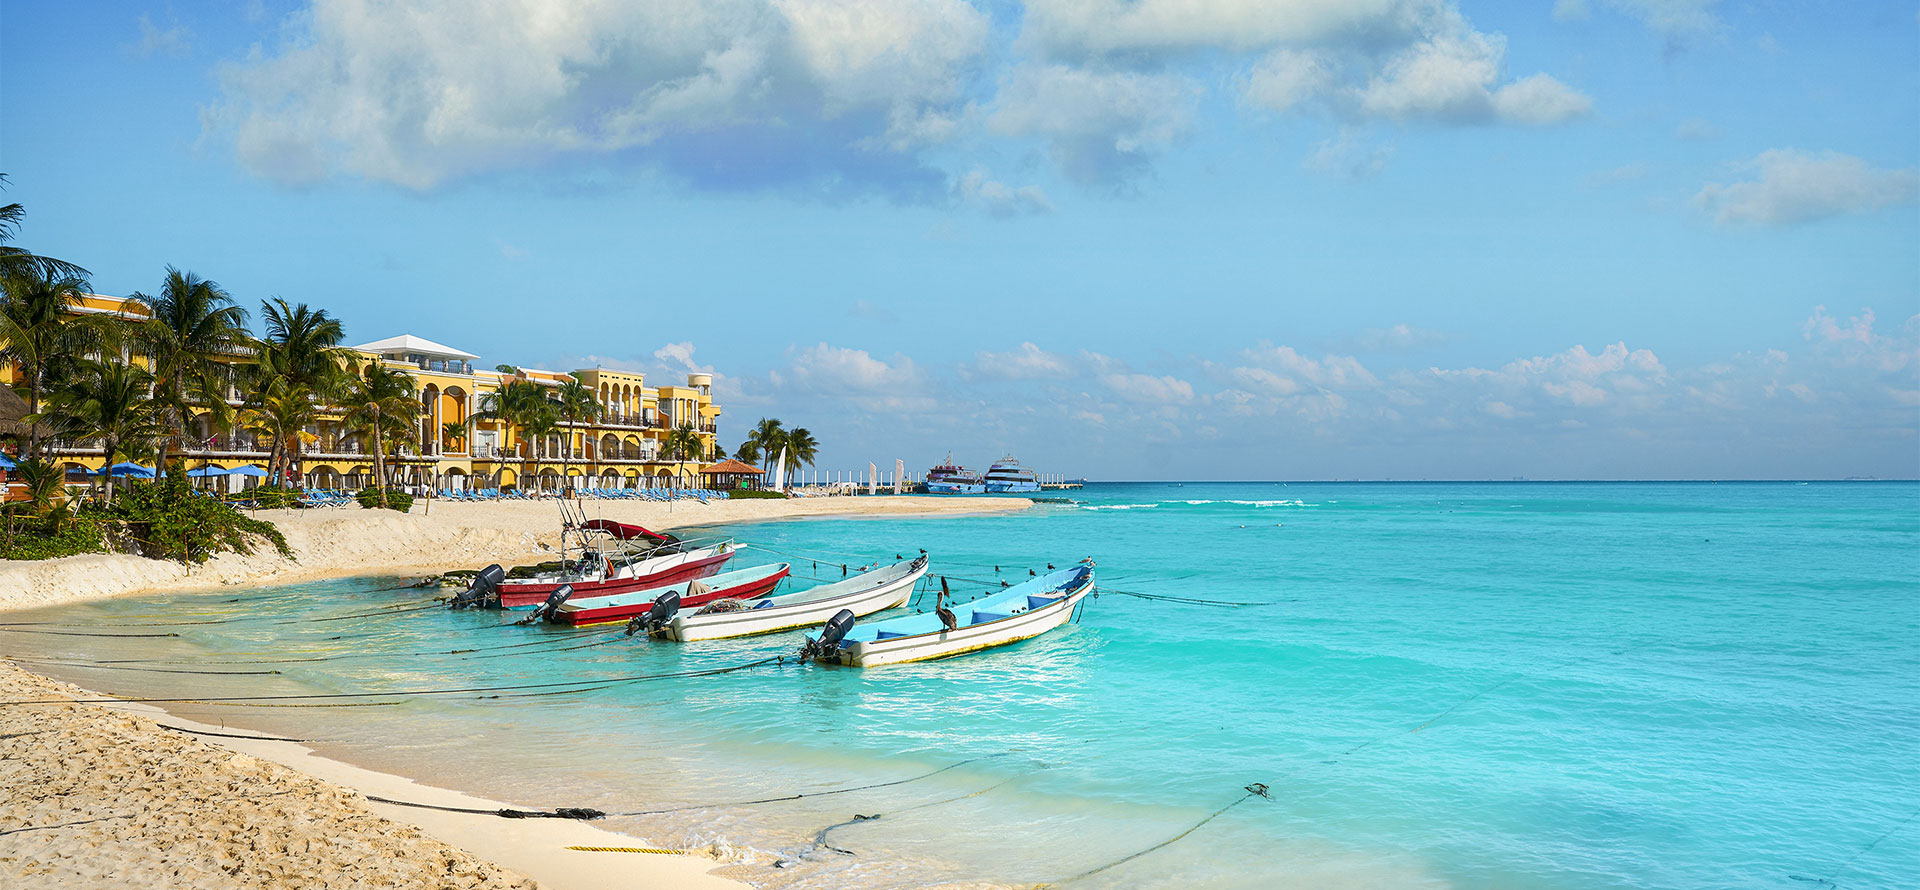 Playa del carmen all inclusive family resort with boat.